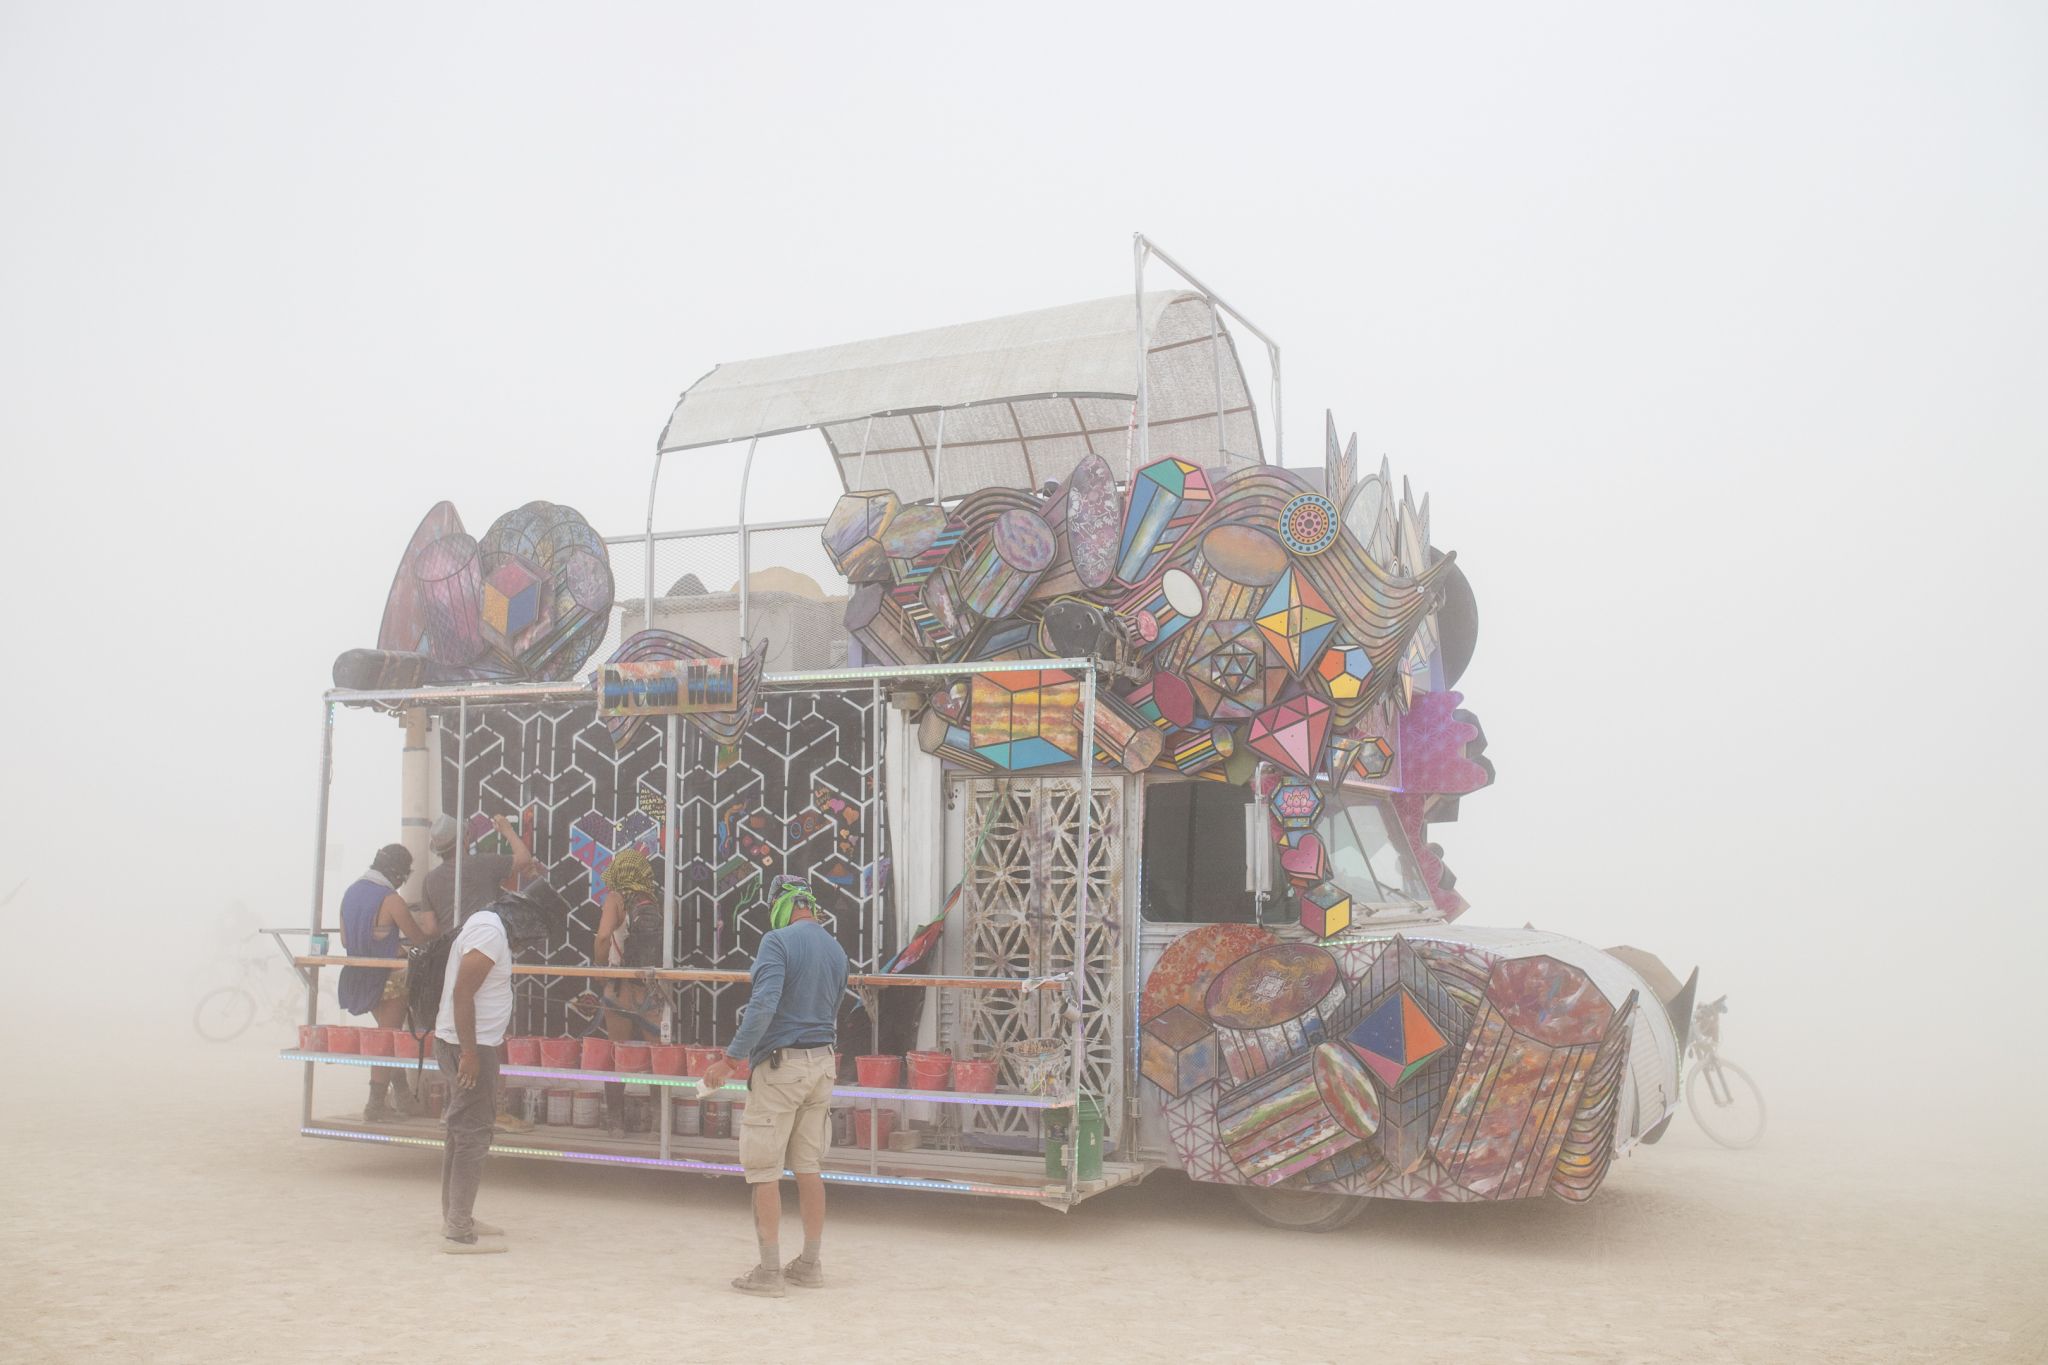 Dust storm nearly derails marquee event at Burning Man